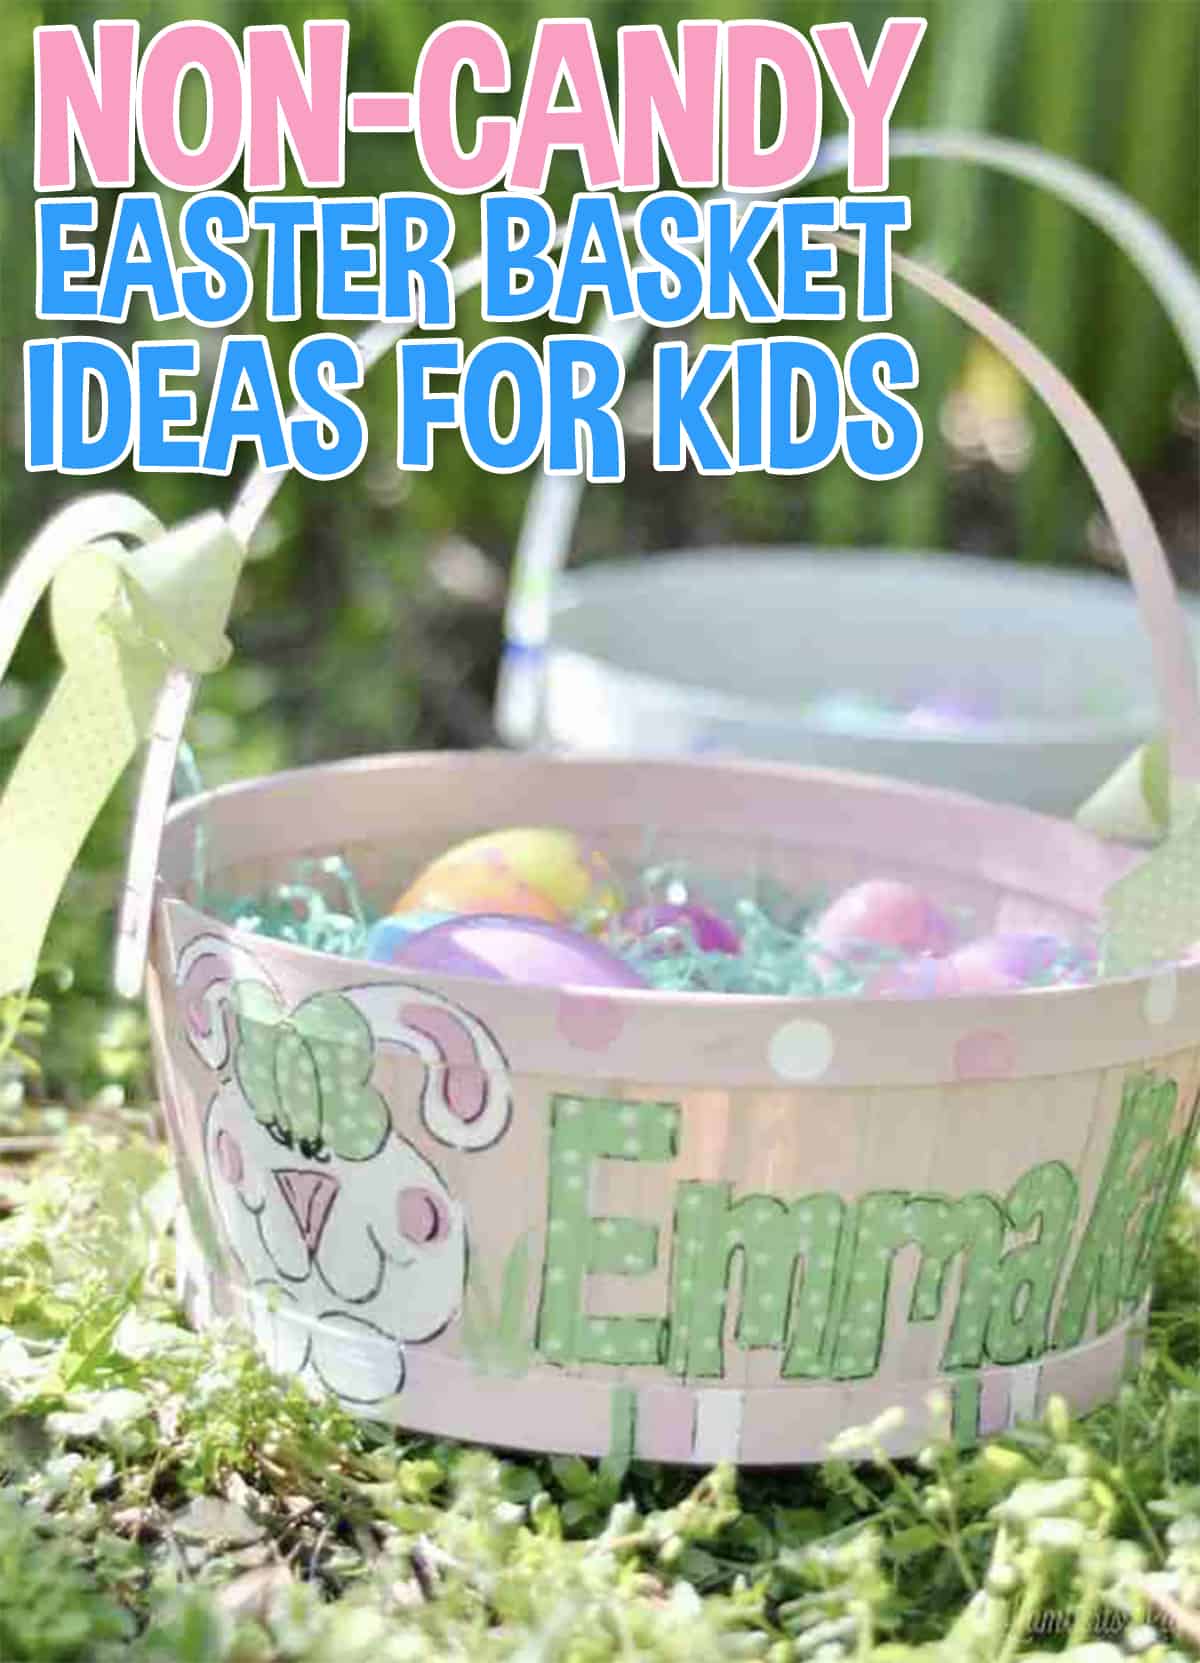 101 Non-Candy Easter Basket Ideas for Kids